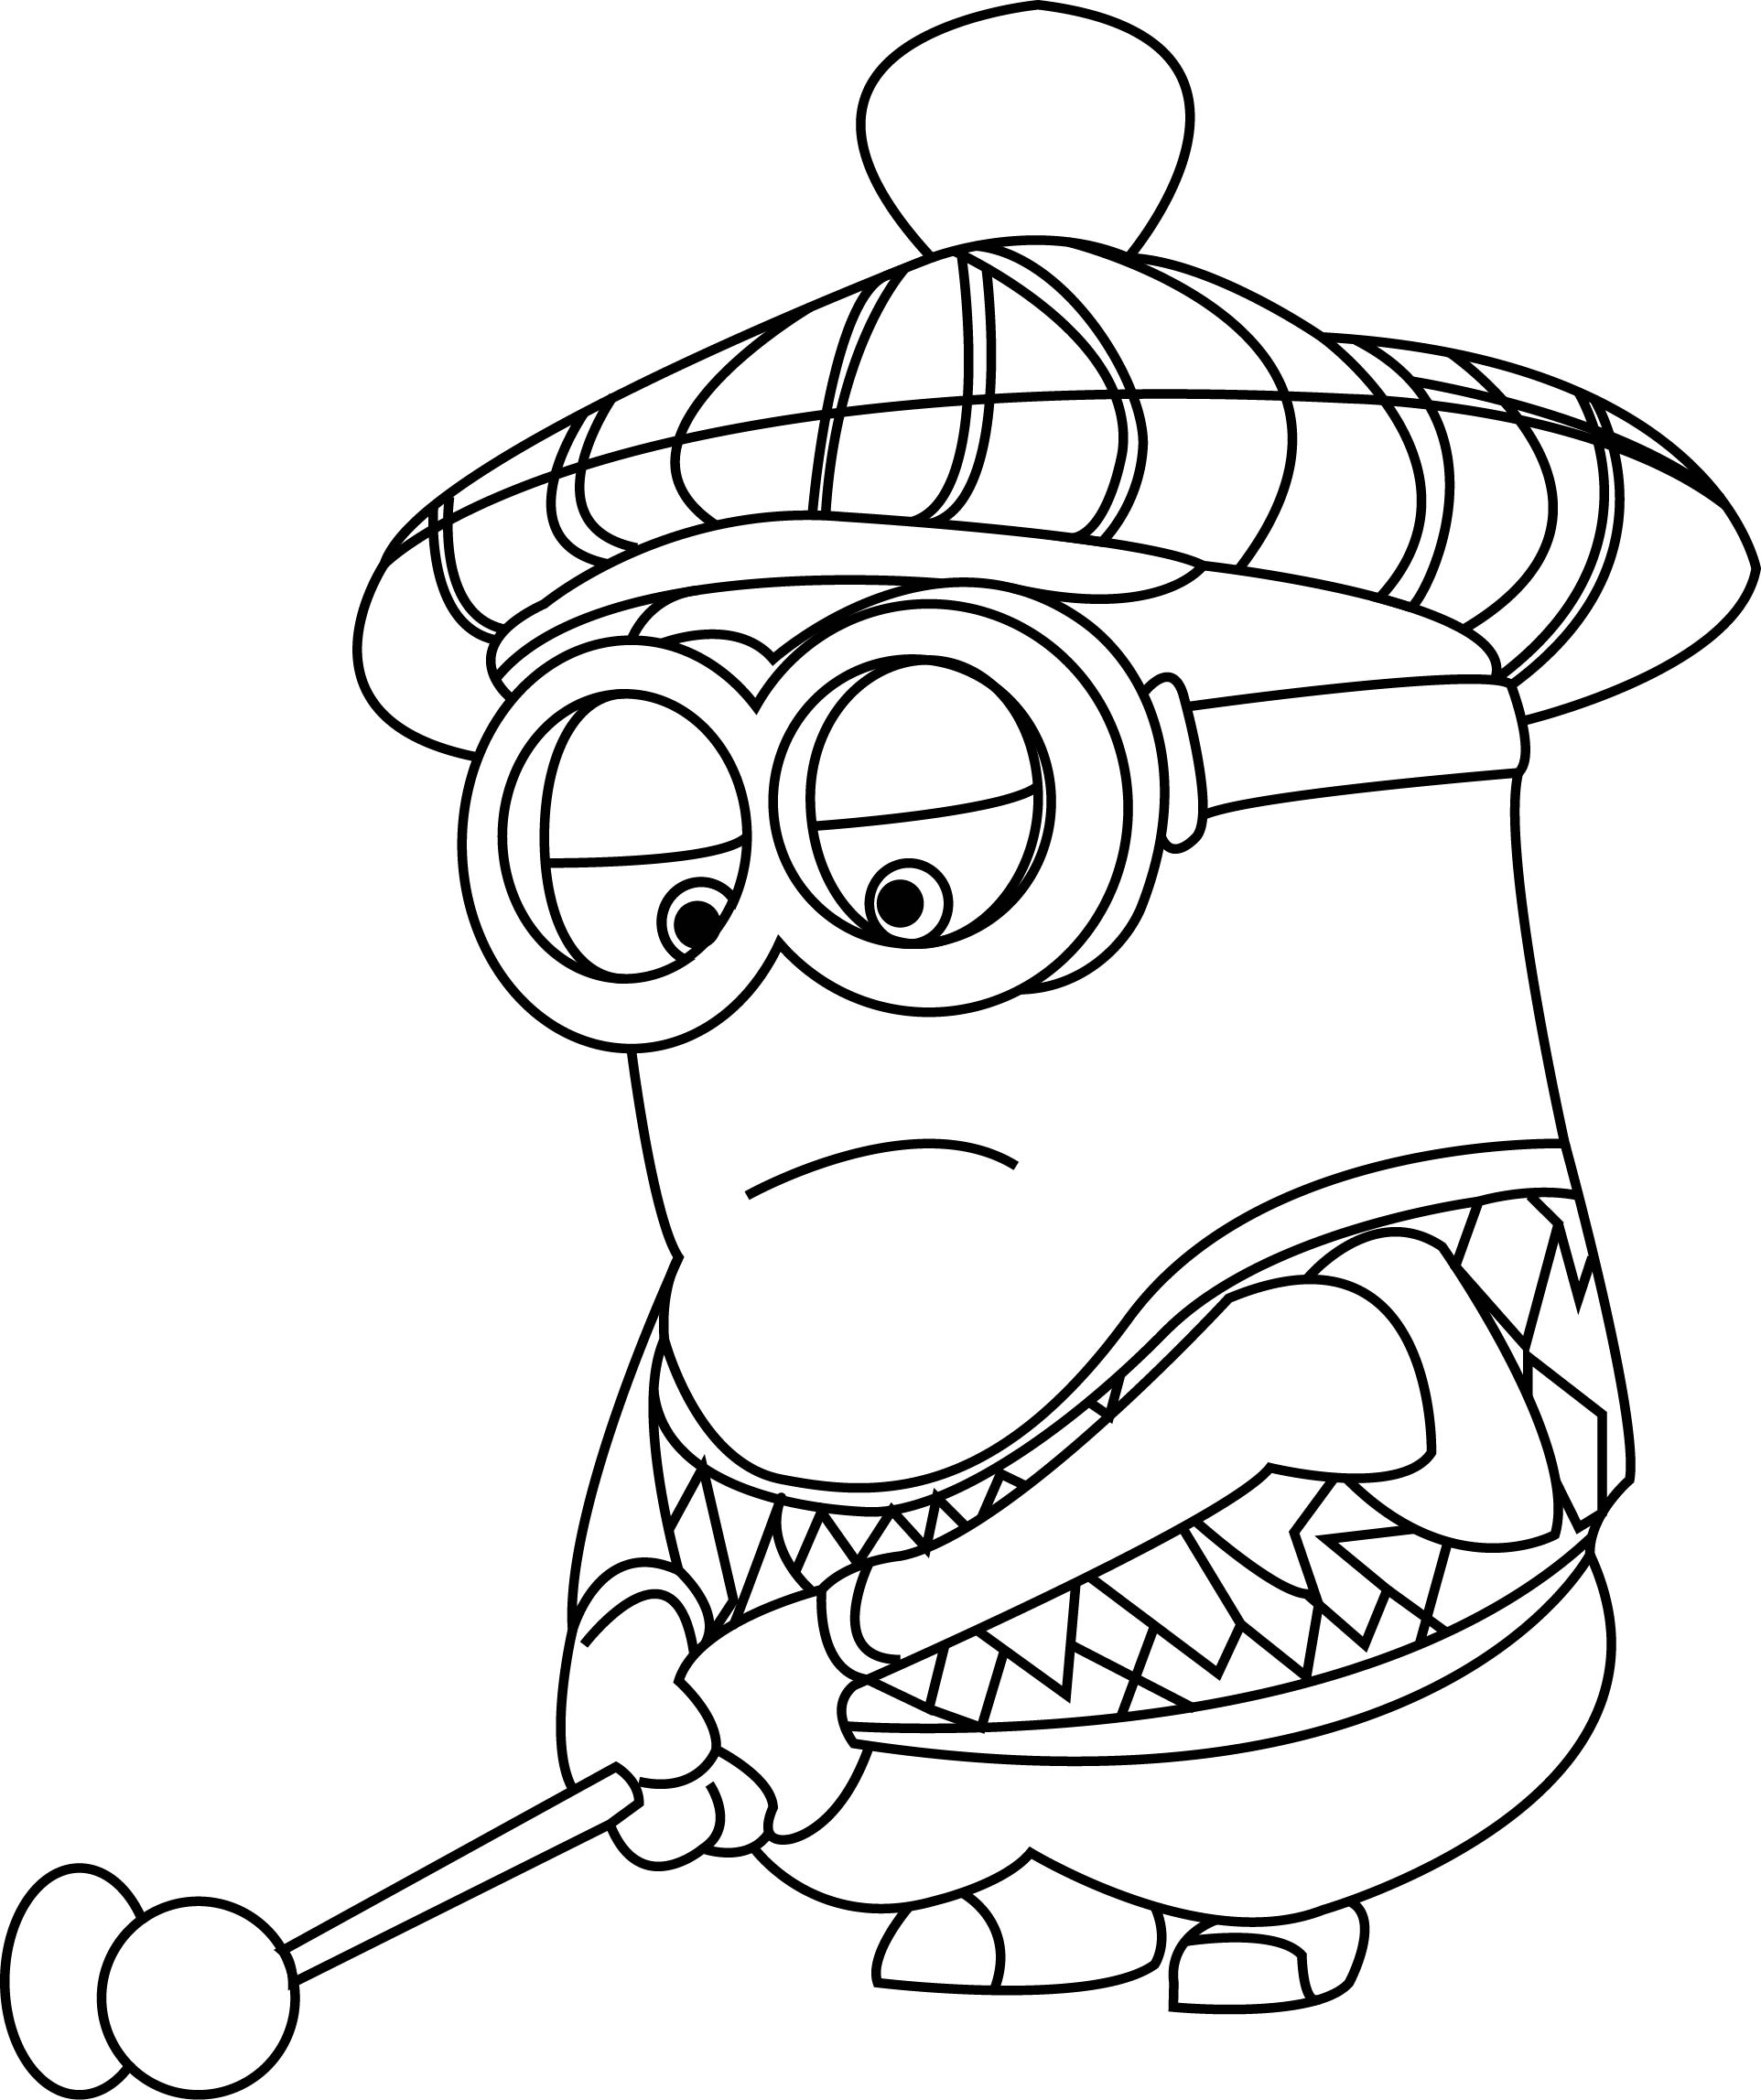 Golf Course Coloring Pages at GetColorings.com | Free printable